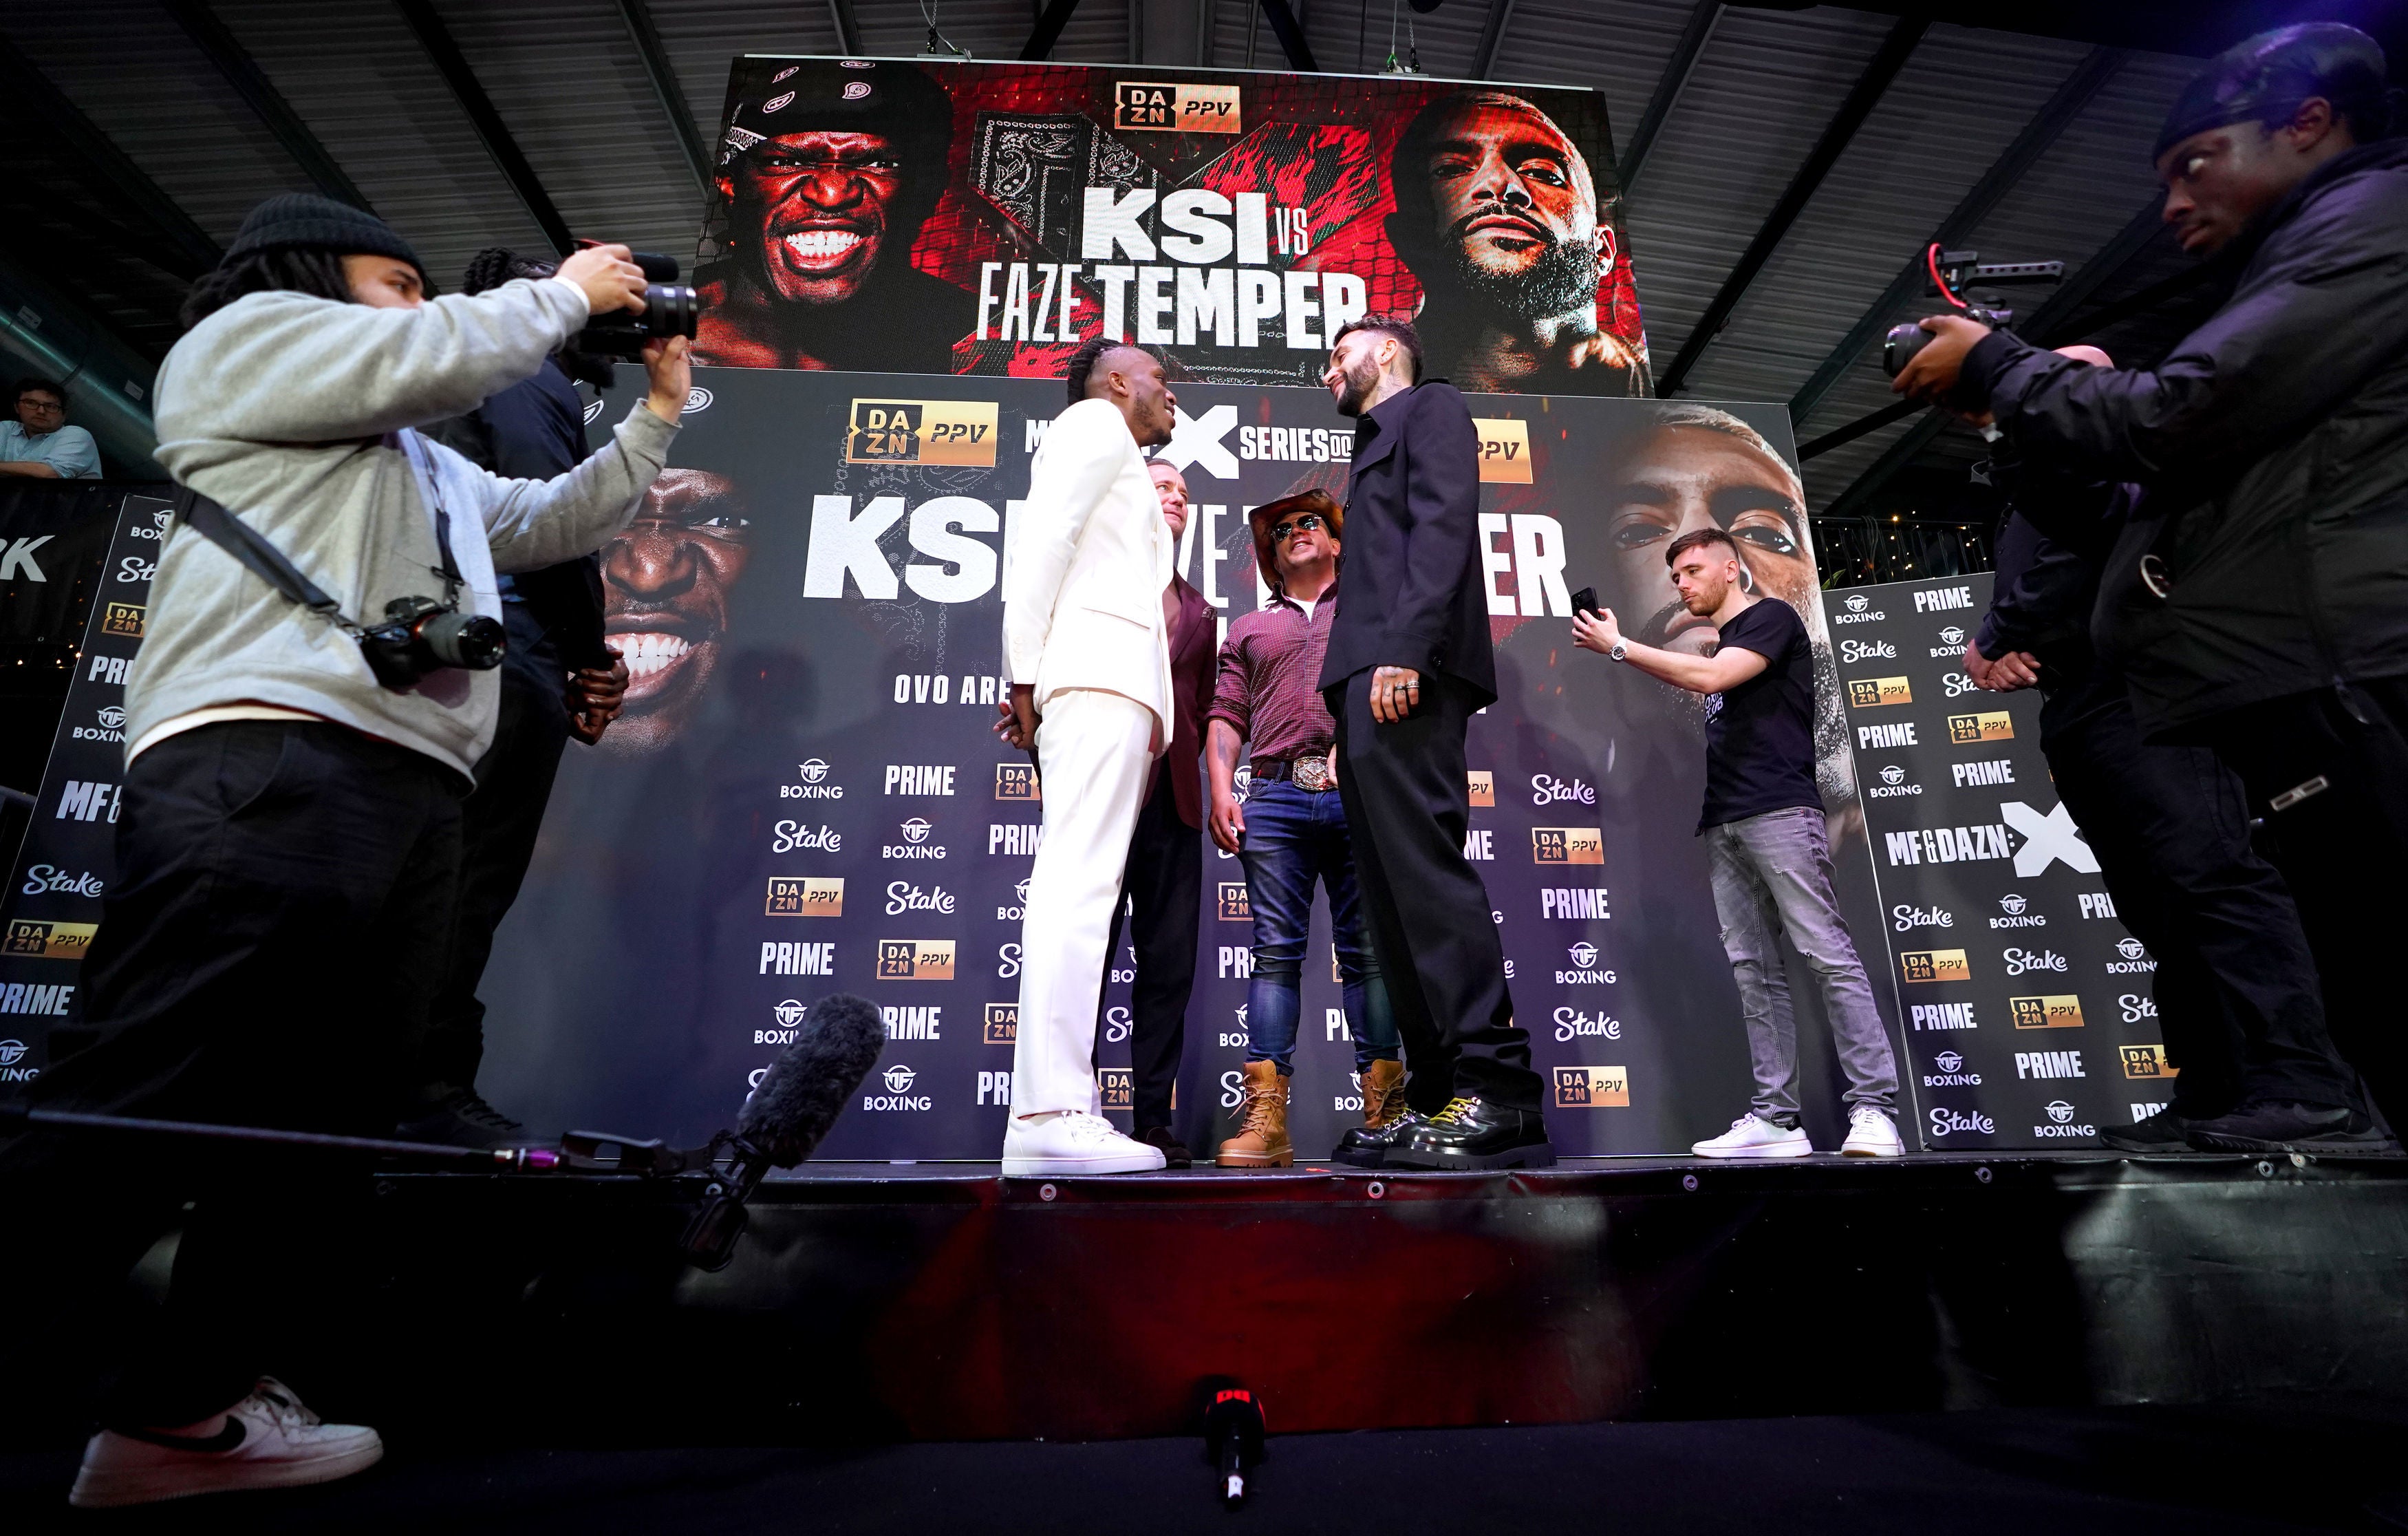 KSI vs FaZe Temperrr live stream How to watch fight online and on TV today The Independent